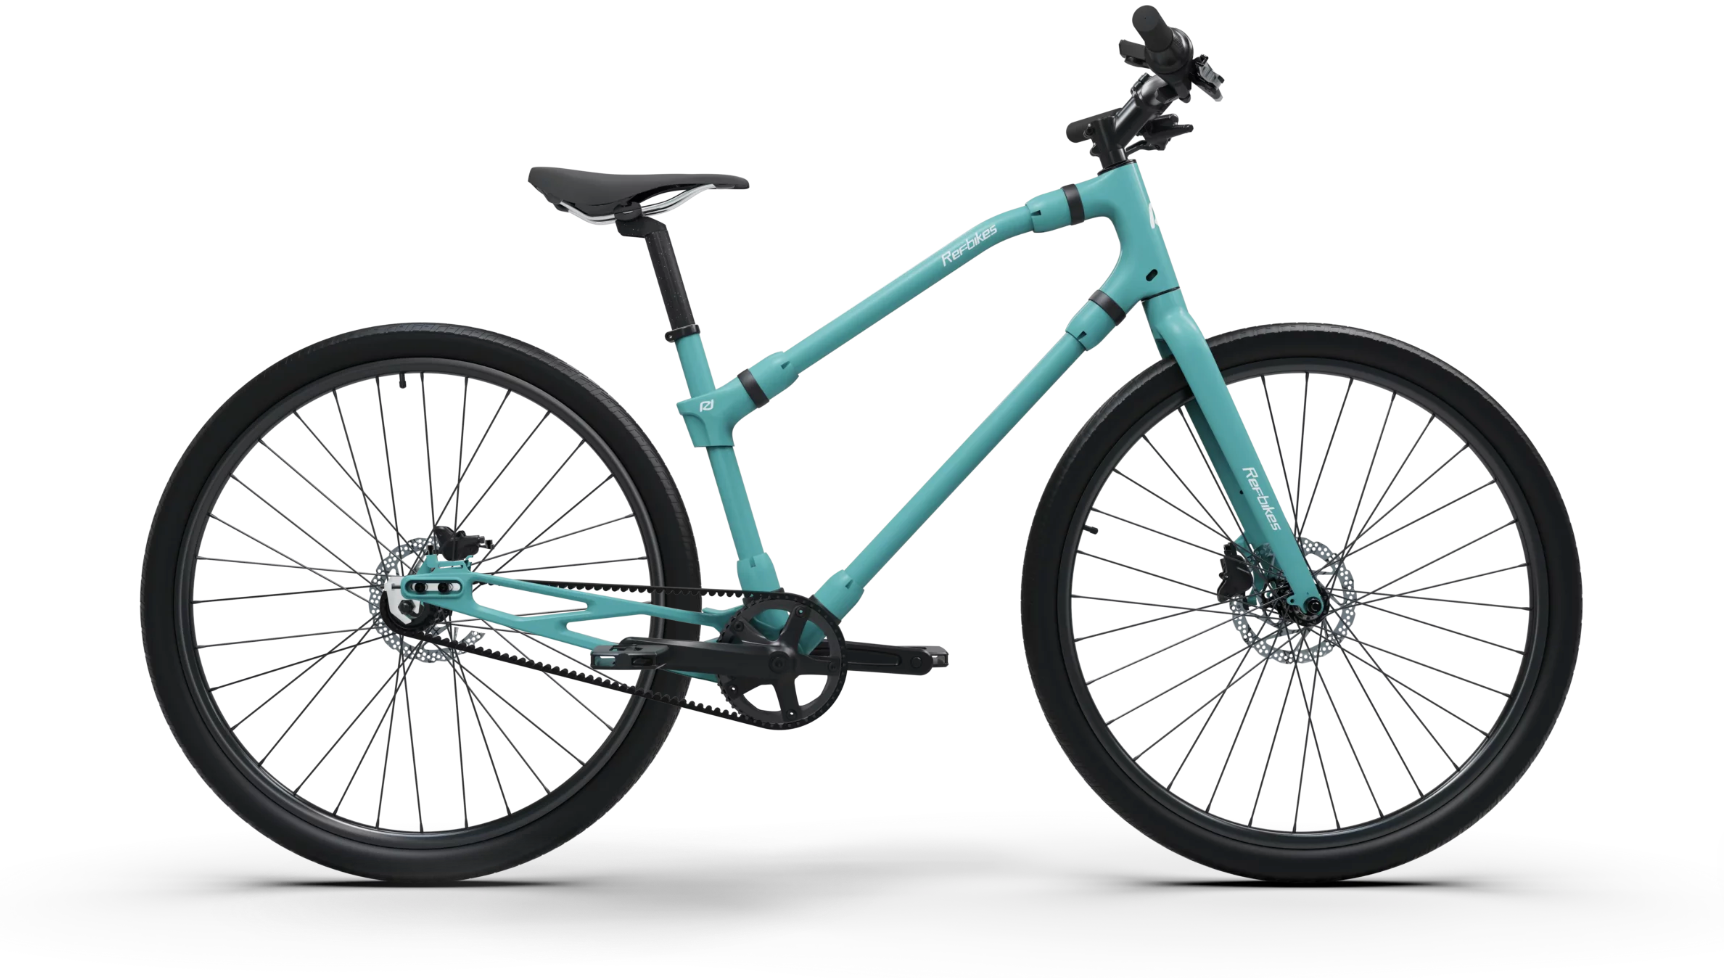 Pastel blue Ref Essential bike with sleek design, perfect for eco-friendly urban commuting and stylish city rides.